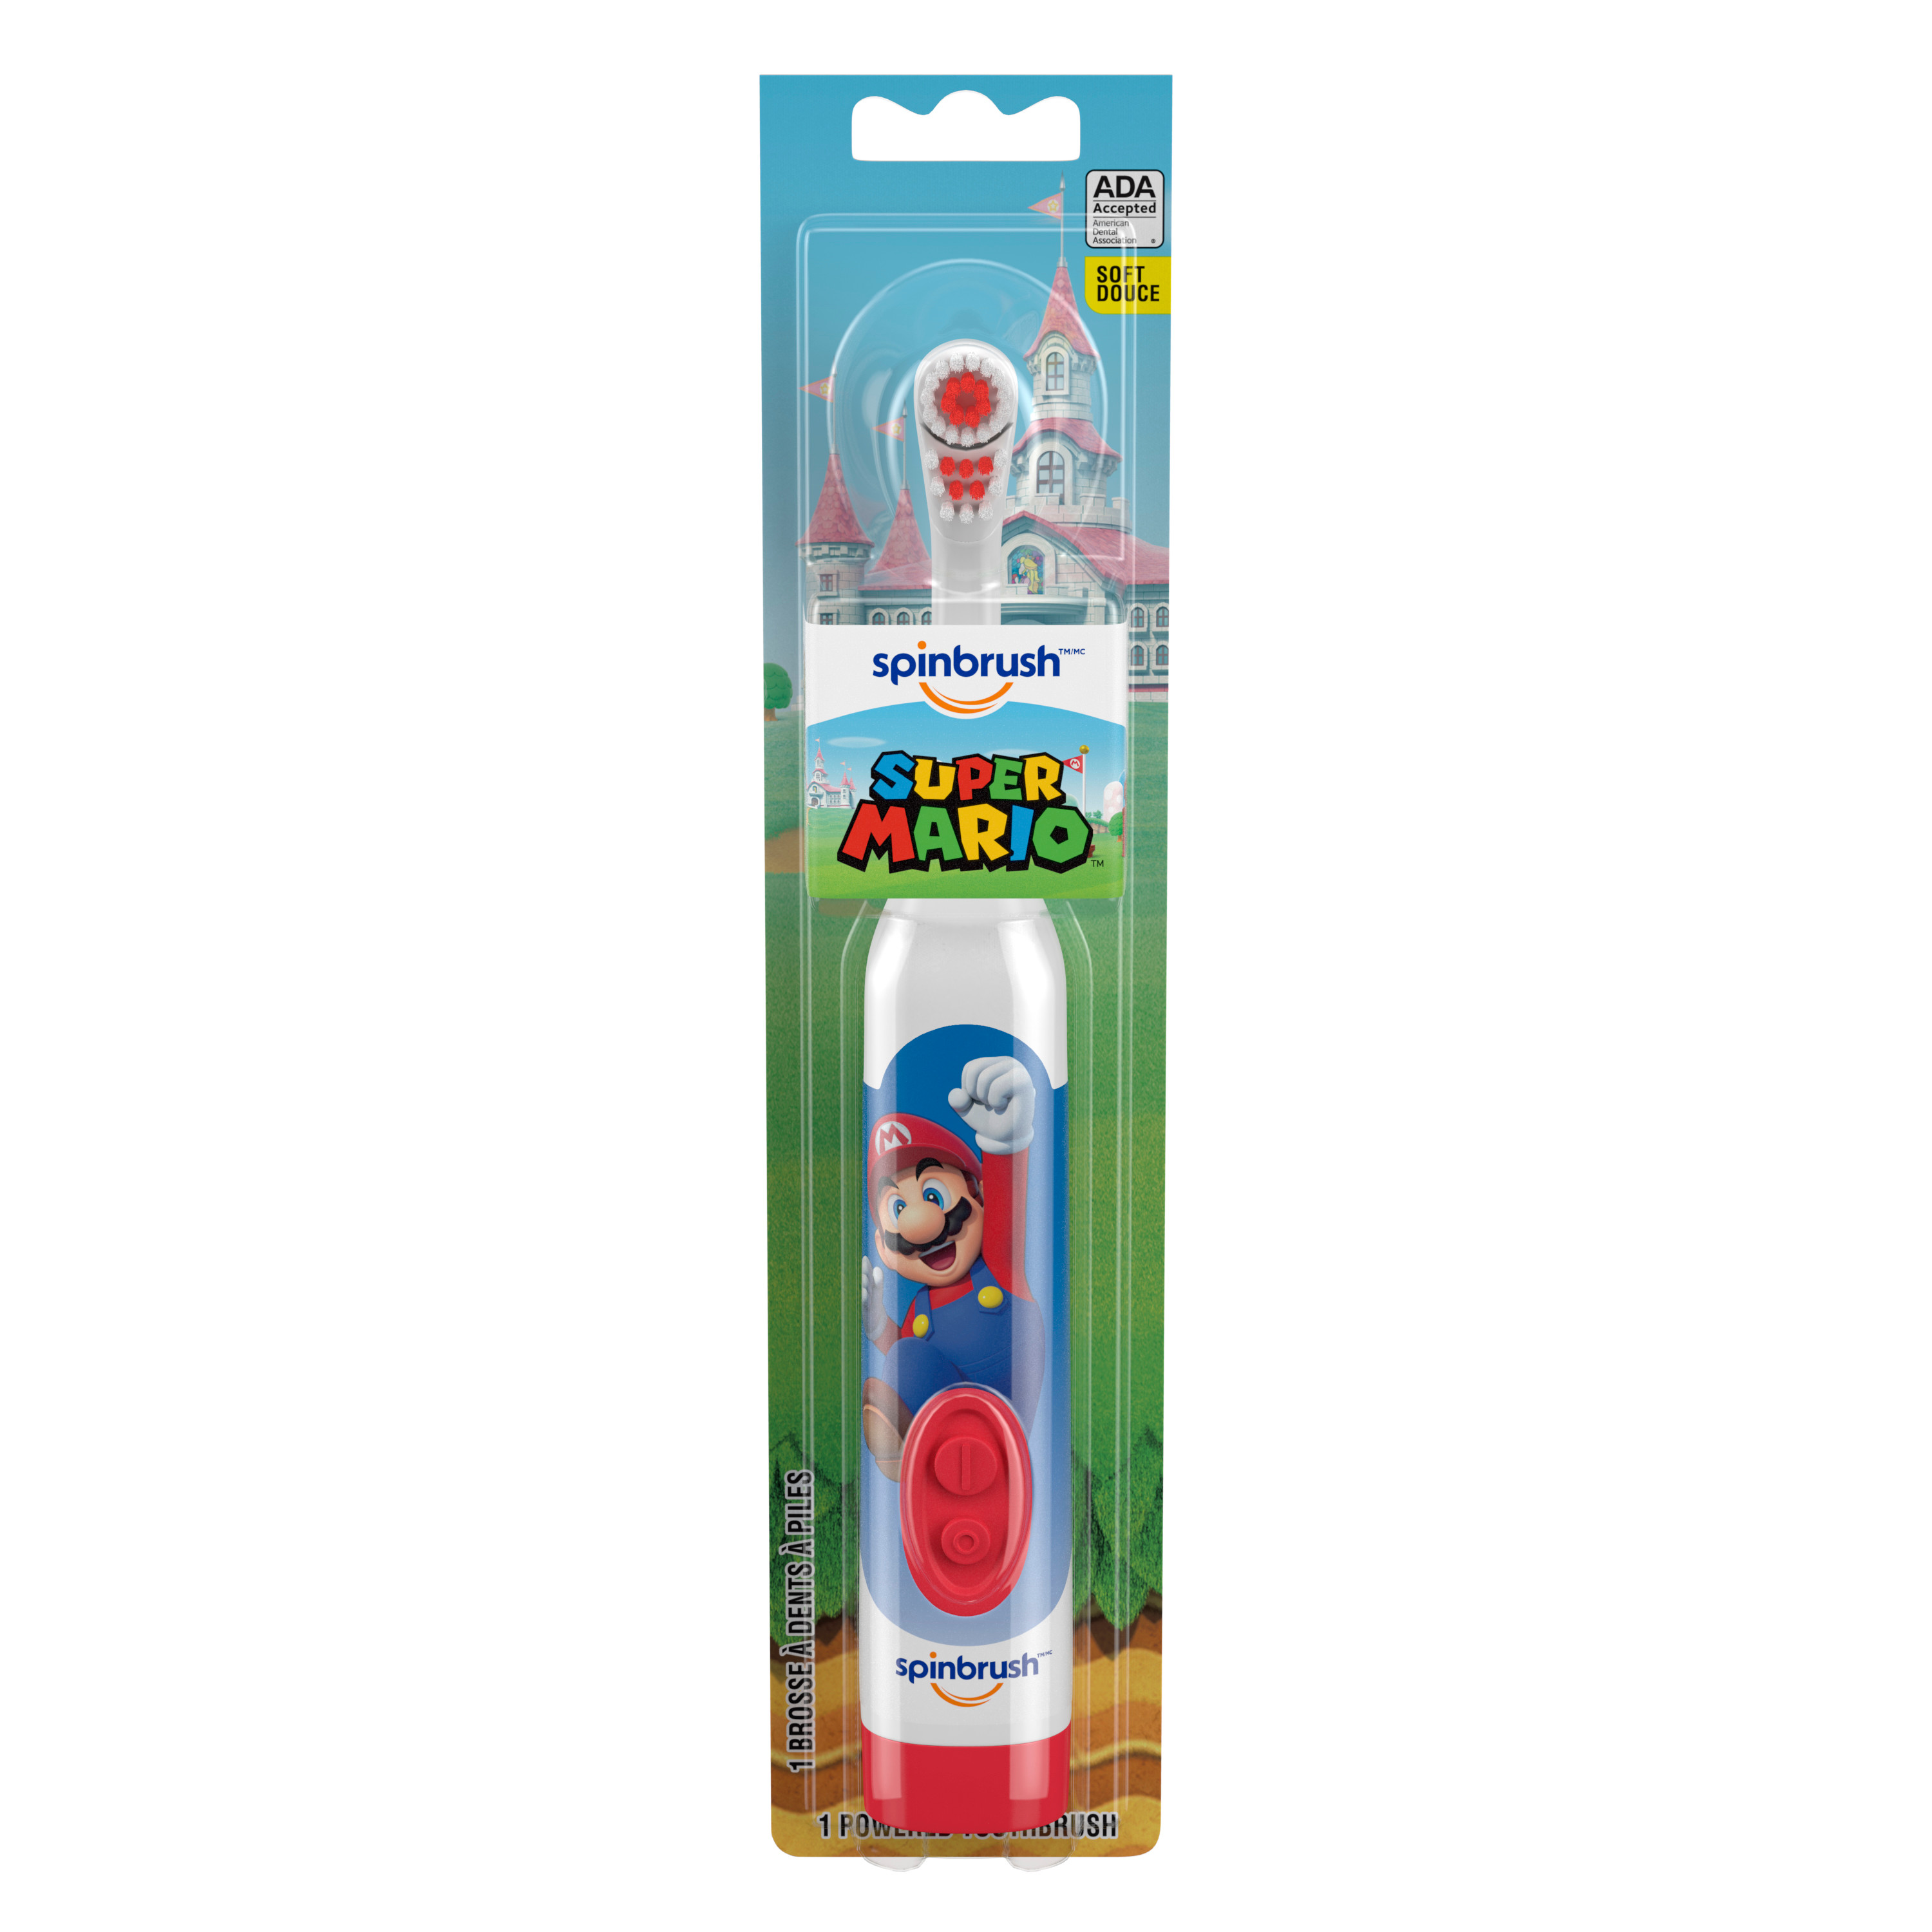 Super Mario Kid’s Spinbrush Electric Toothbrush, Battery Powered, Soft Bristles, Ages 3+ - image 1 of 6